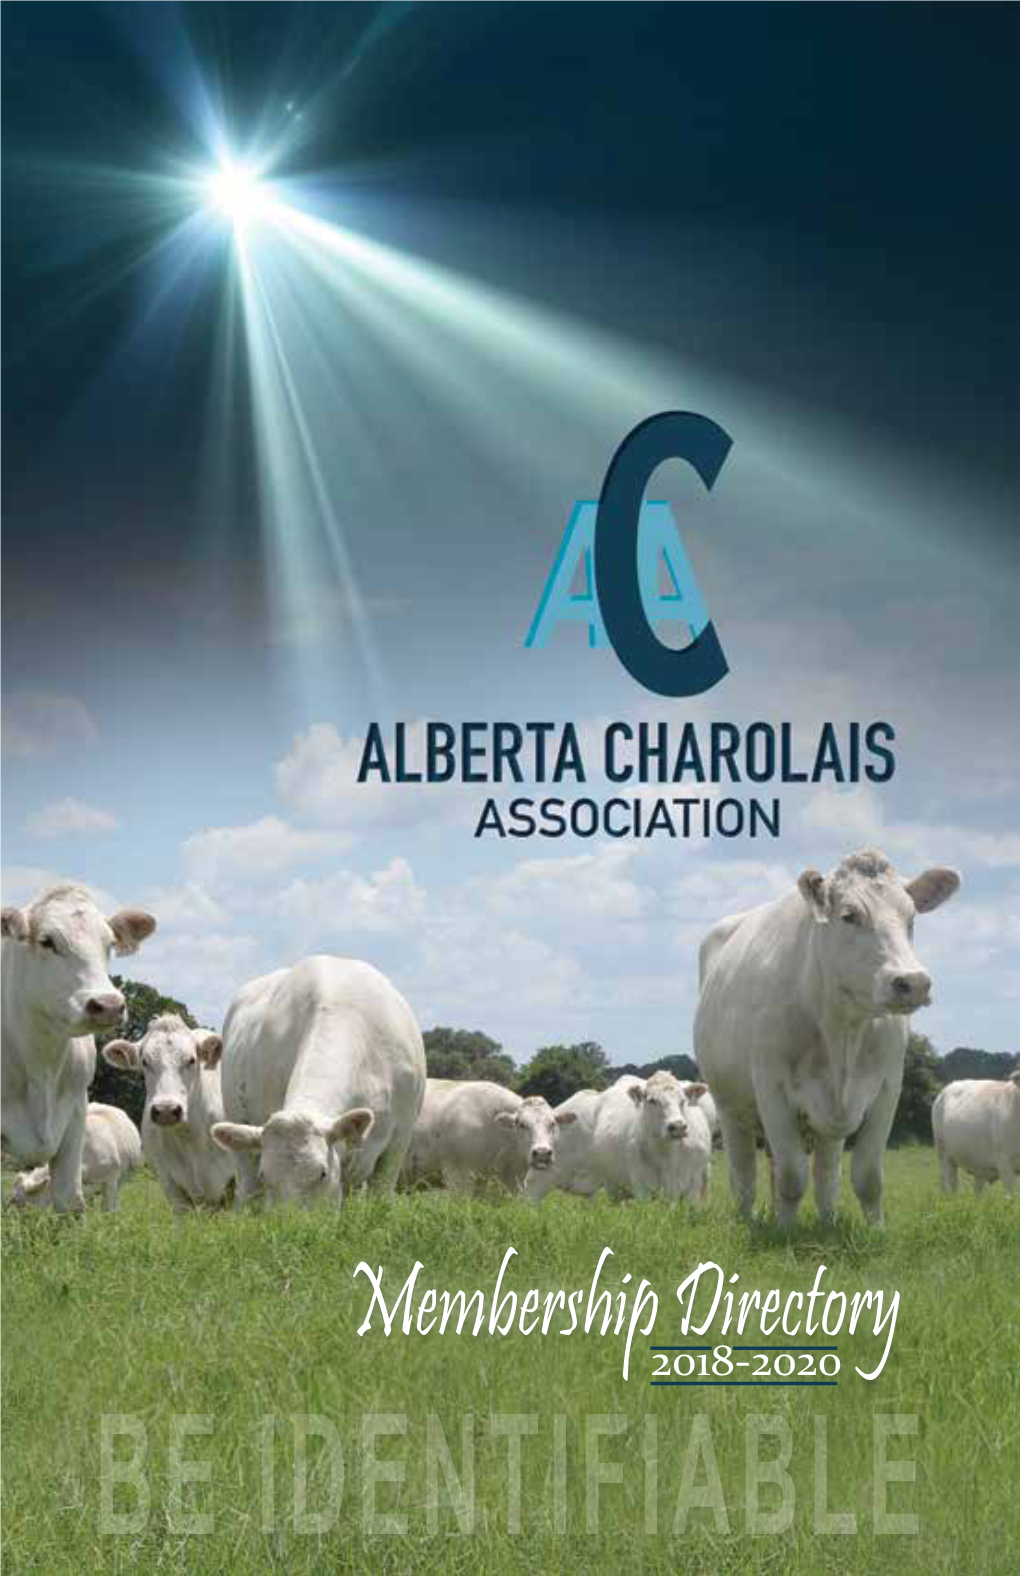 BE IDENTIFIABLE 1 Circlededicated to Raising Quality Charolais CEE Cattle Since